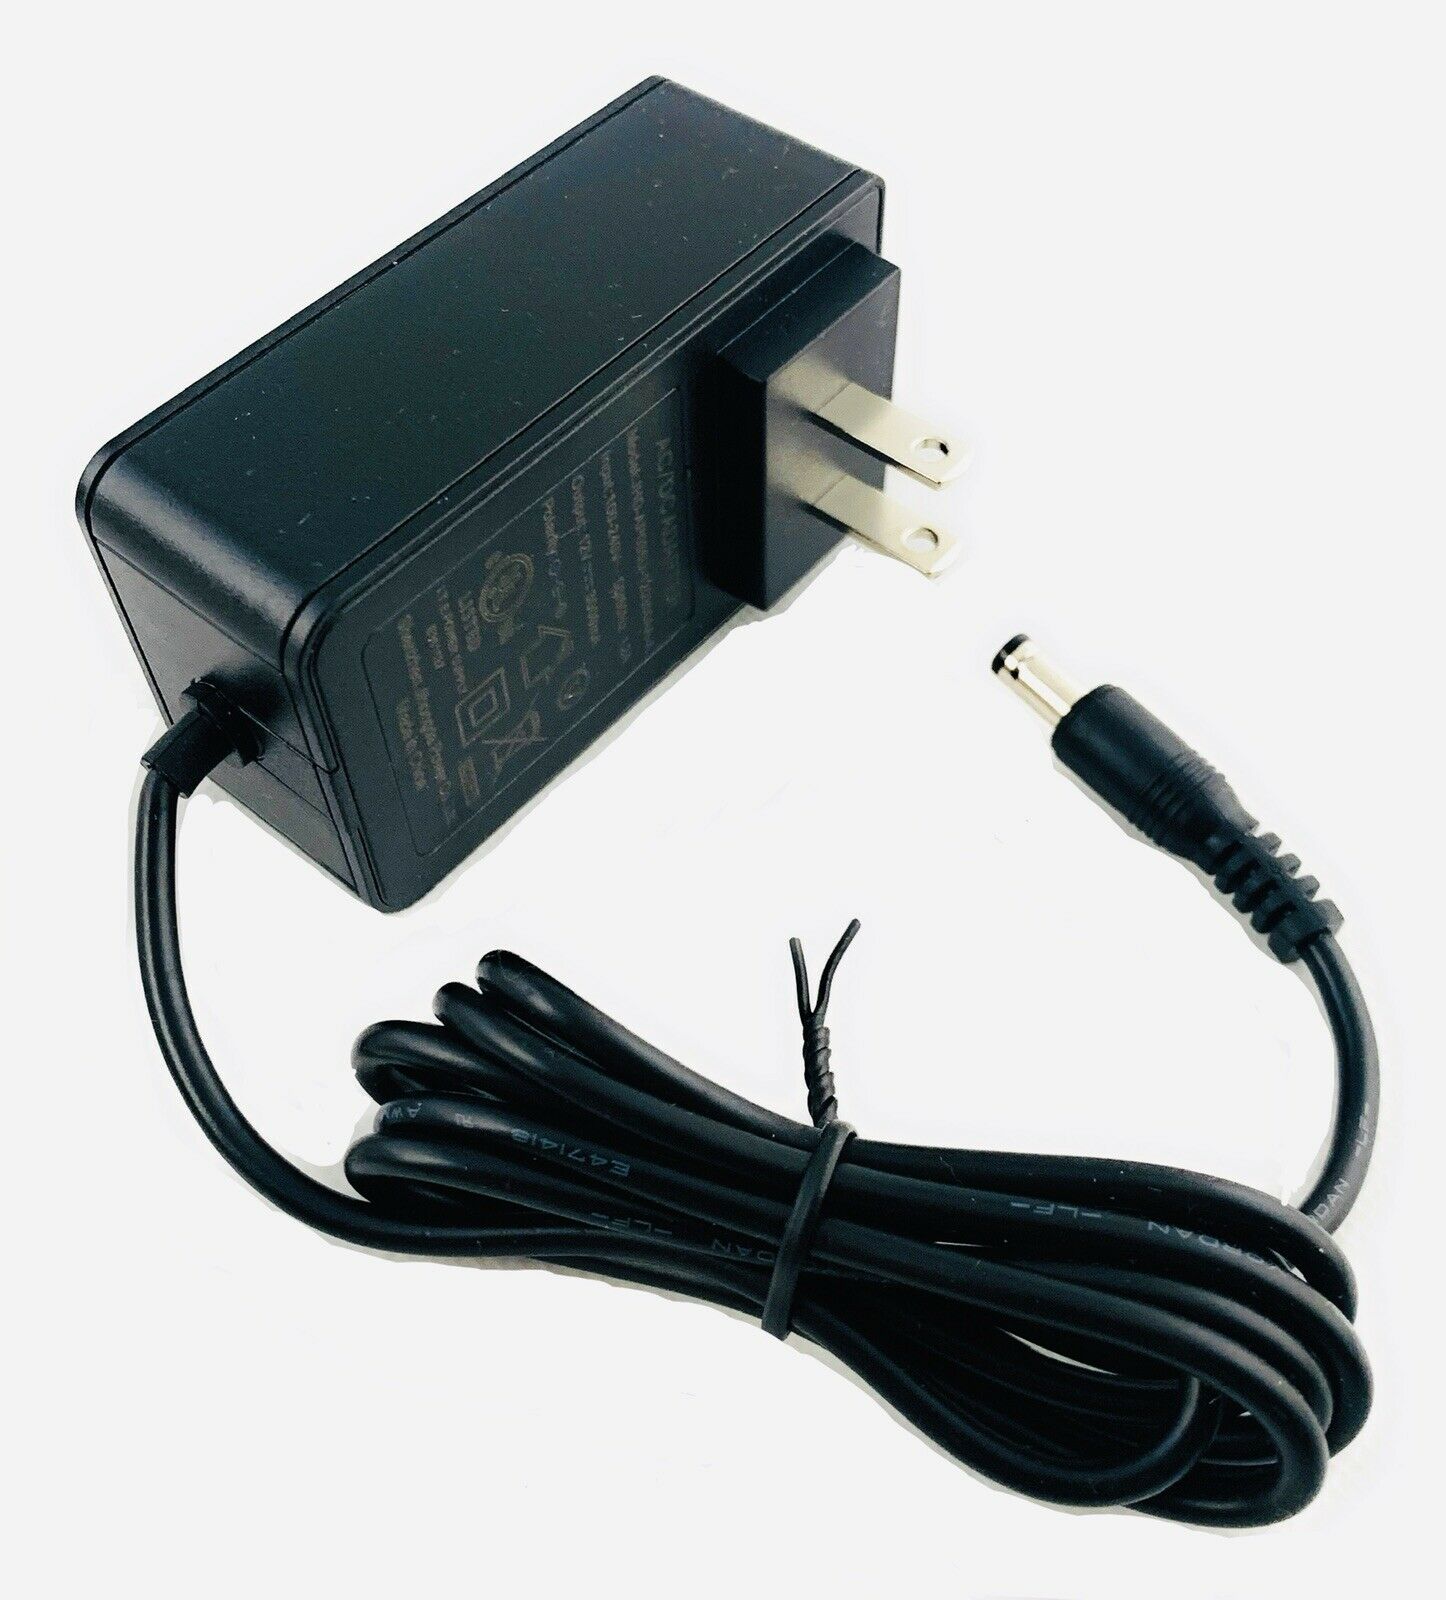 15V 2A Power Supply Adapter For Mini TV Game Console 100-240V US Plug❤HGF ZIN This power adapter is suitable for mini T